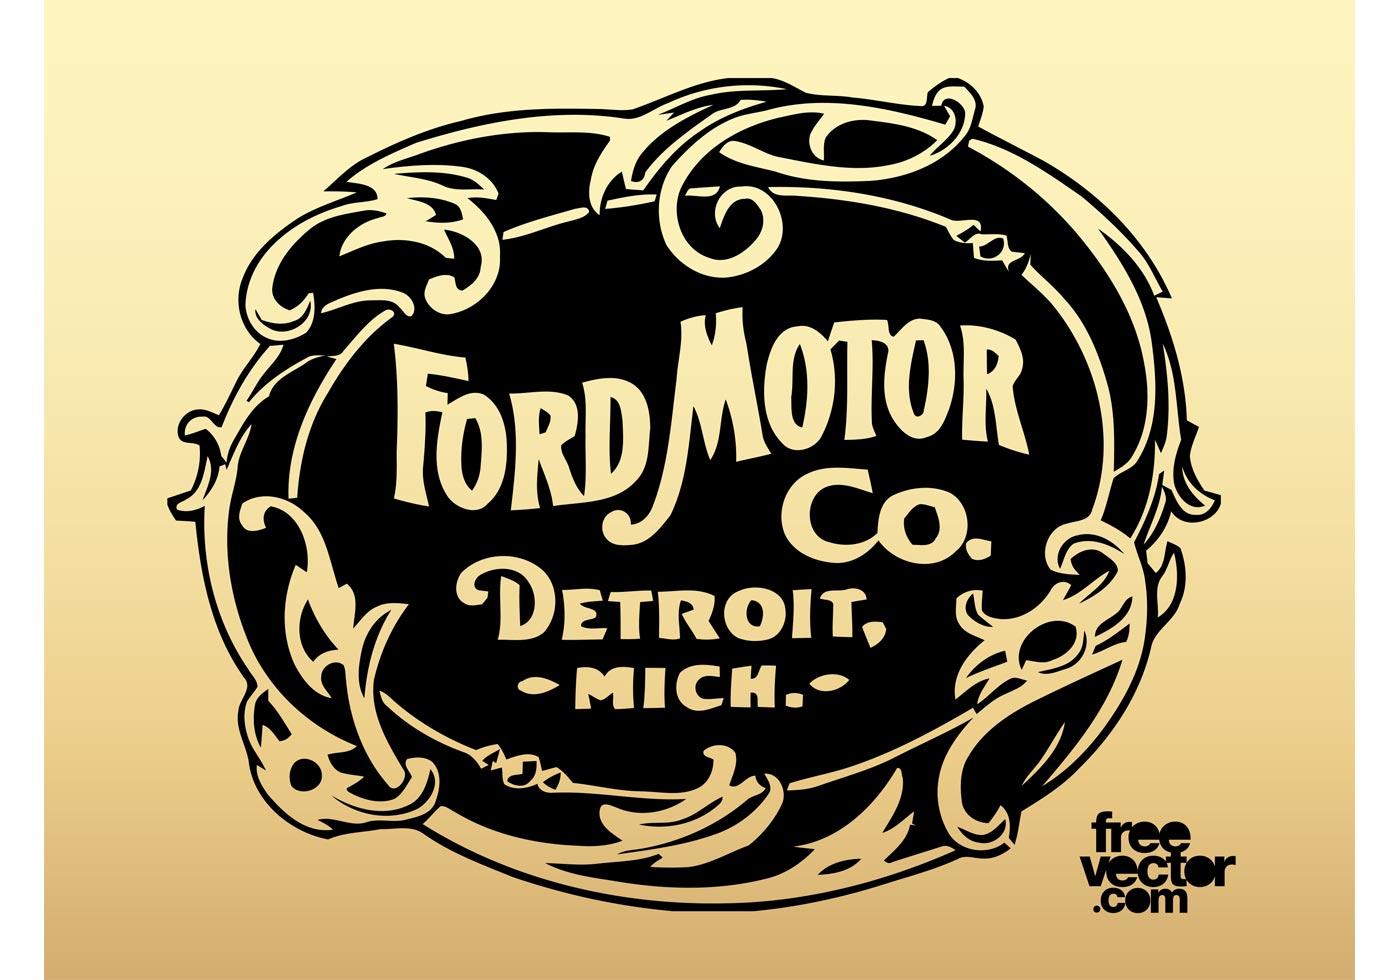 The company is years old. Ford Motor Company (1903) логотип. Ford Motor Company 1903 logo. Ford Motor Company самый первый логотип.